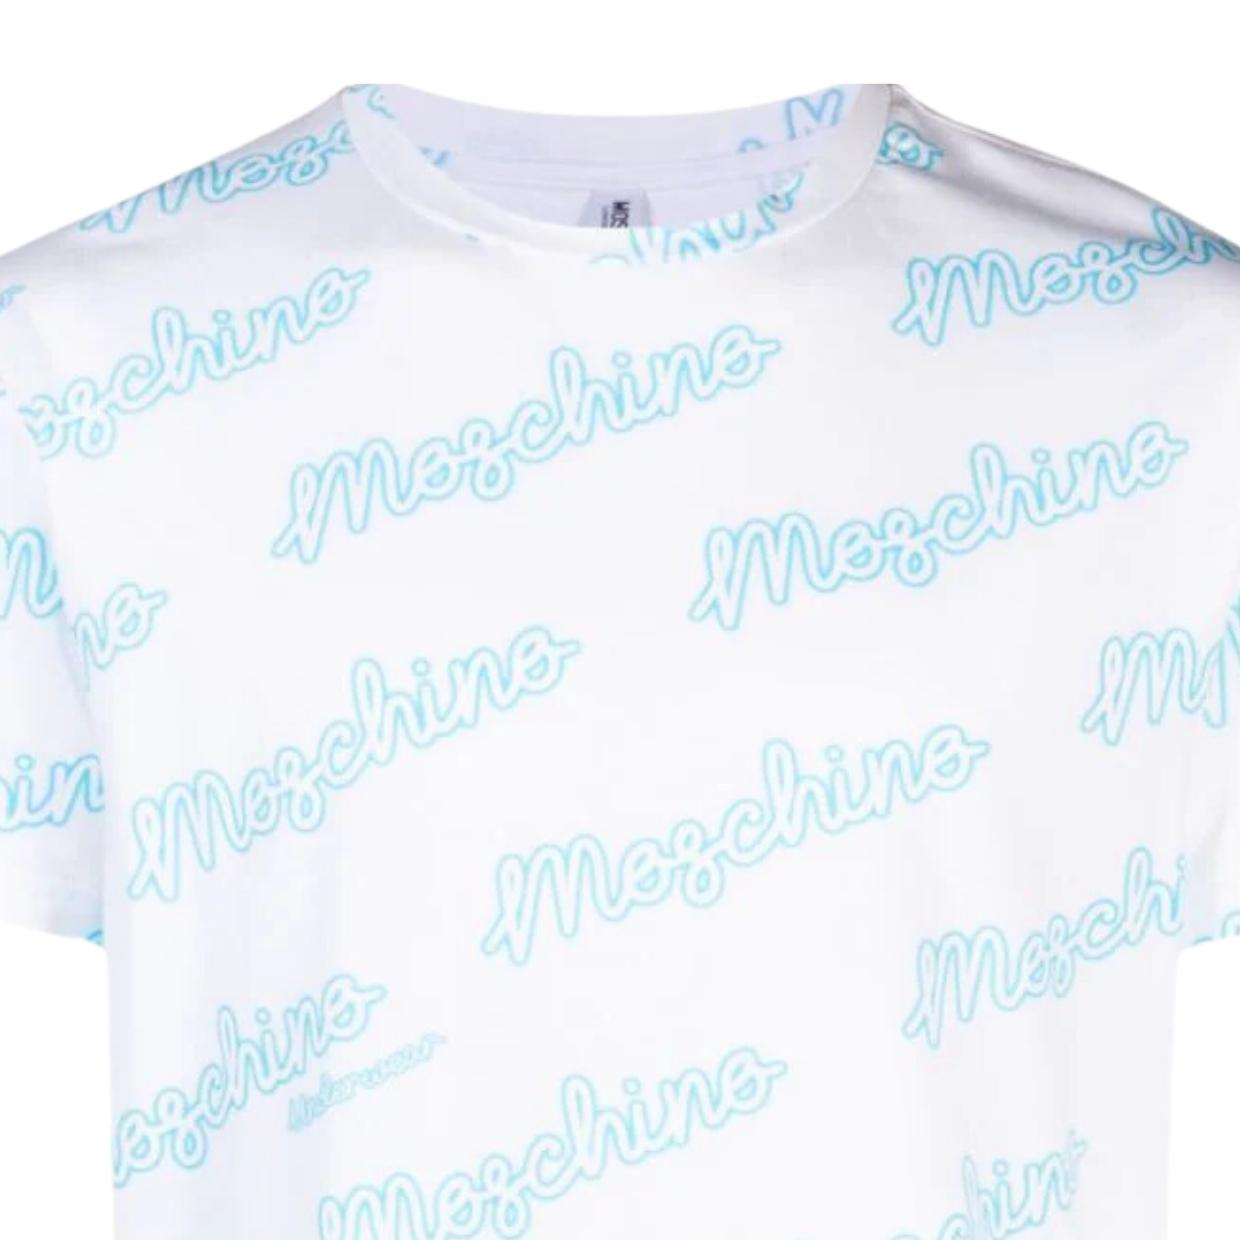 Moschino Underwear All-Over Contrast Logo White T-Shirt